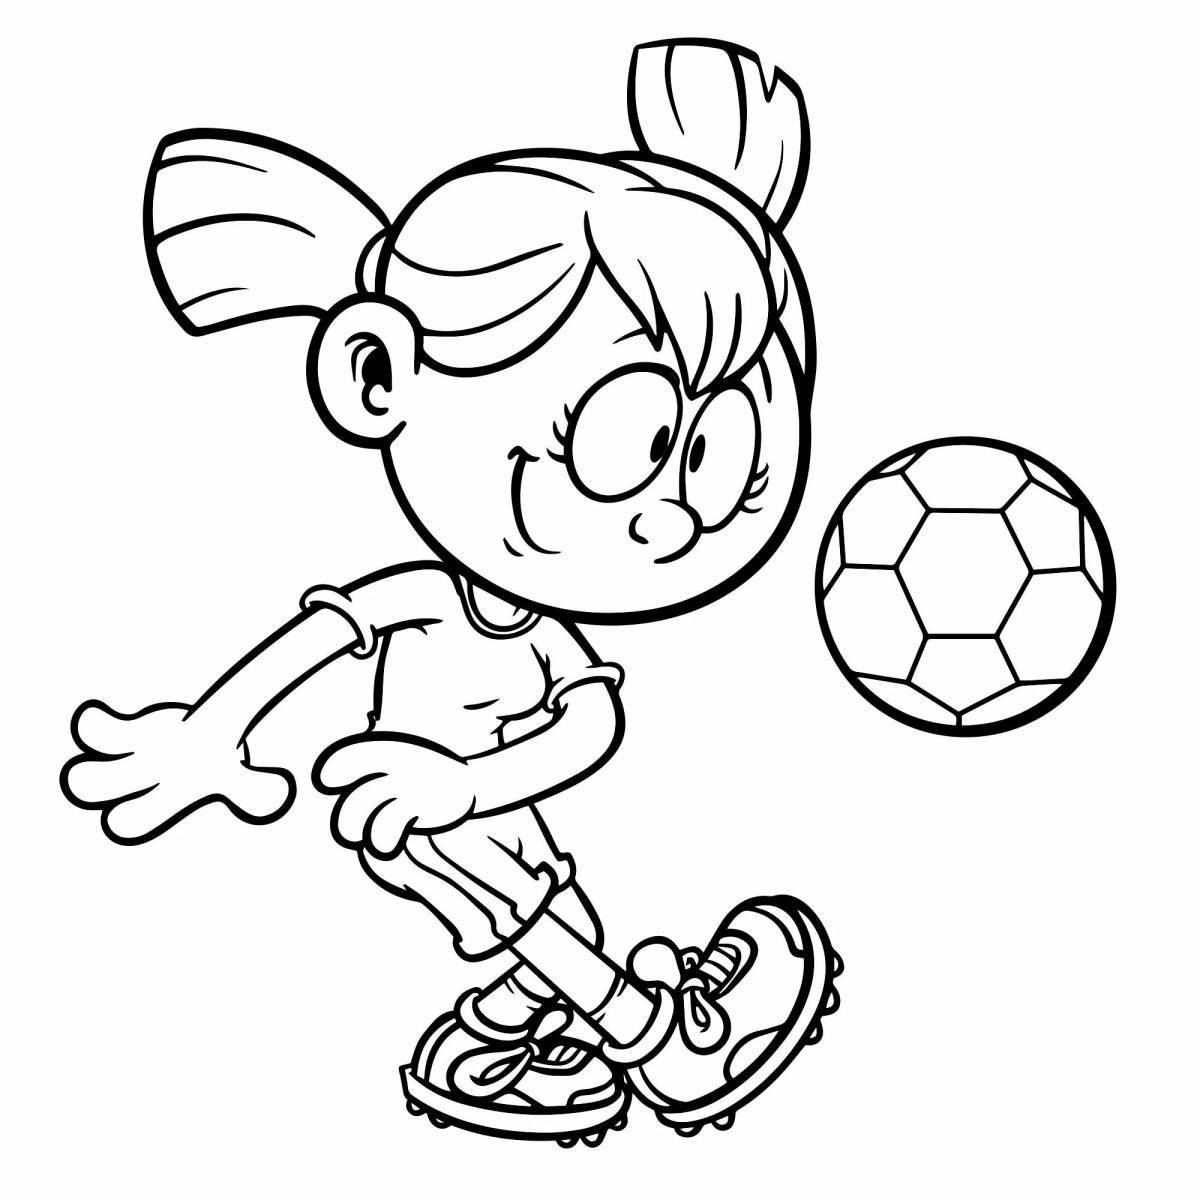 Bright sports coloring book for kids